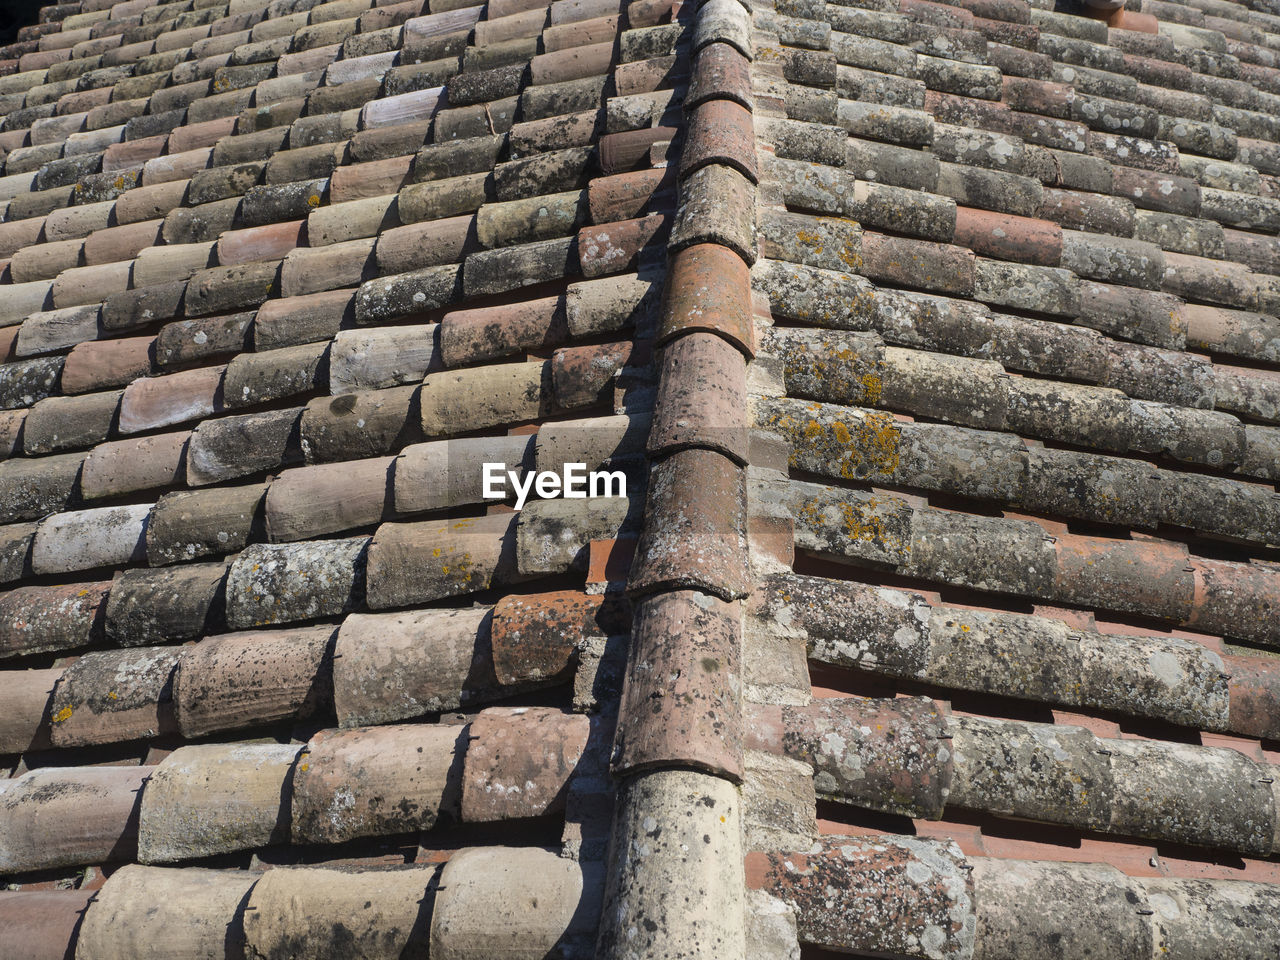 LOW ANGLE VIEW OF BRICK WALL WITH STONE ROOF